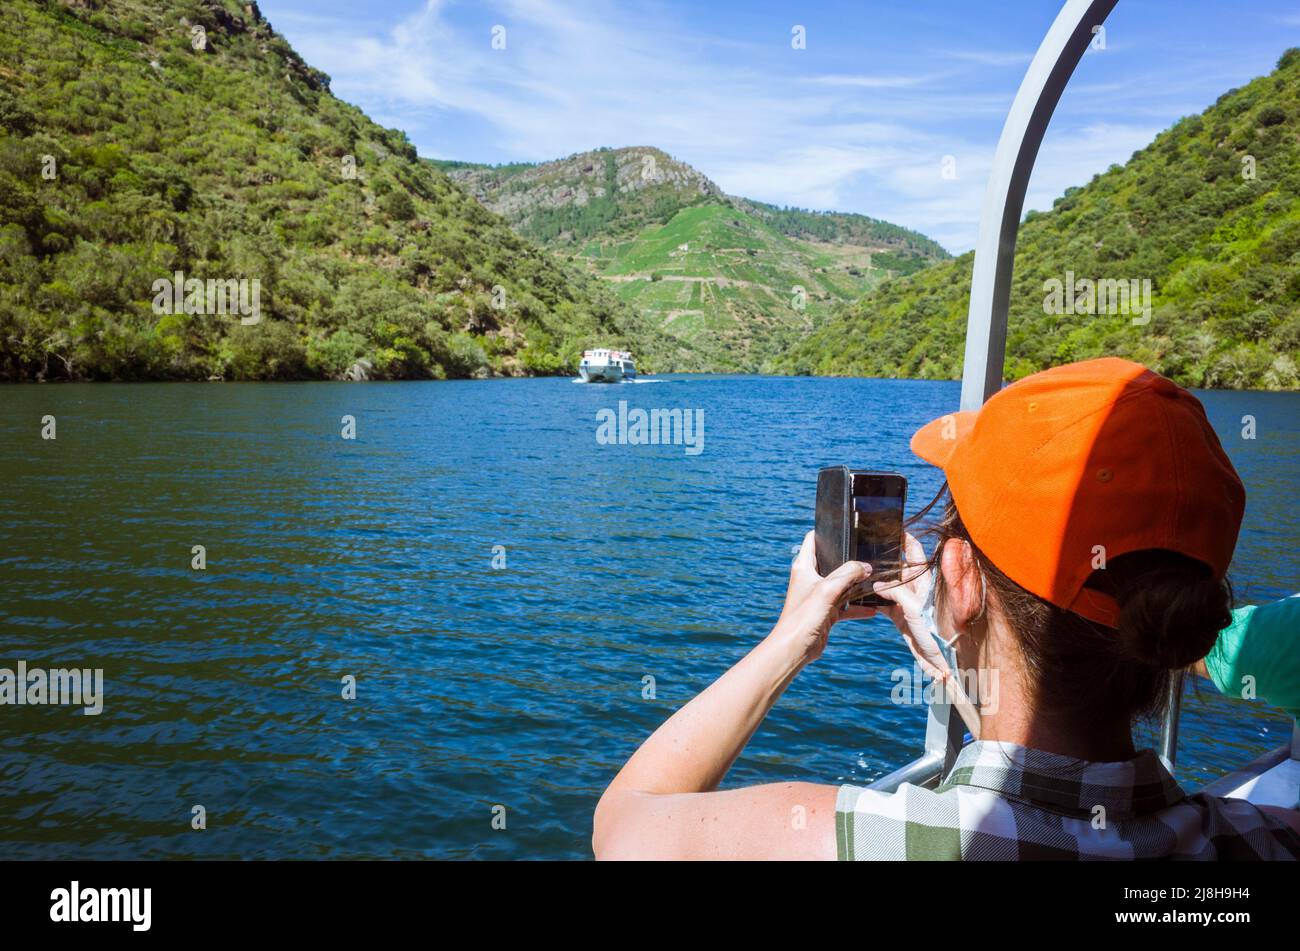 River Sil canyon, Ourense, Galicia, Spain: A woman takes pictures from a ferry boat on the river Sil canyon. Stock Photo